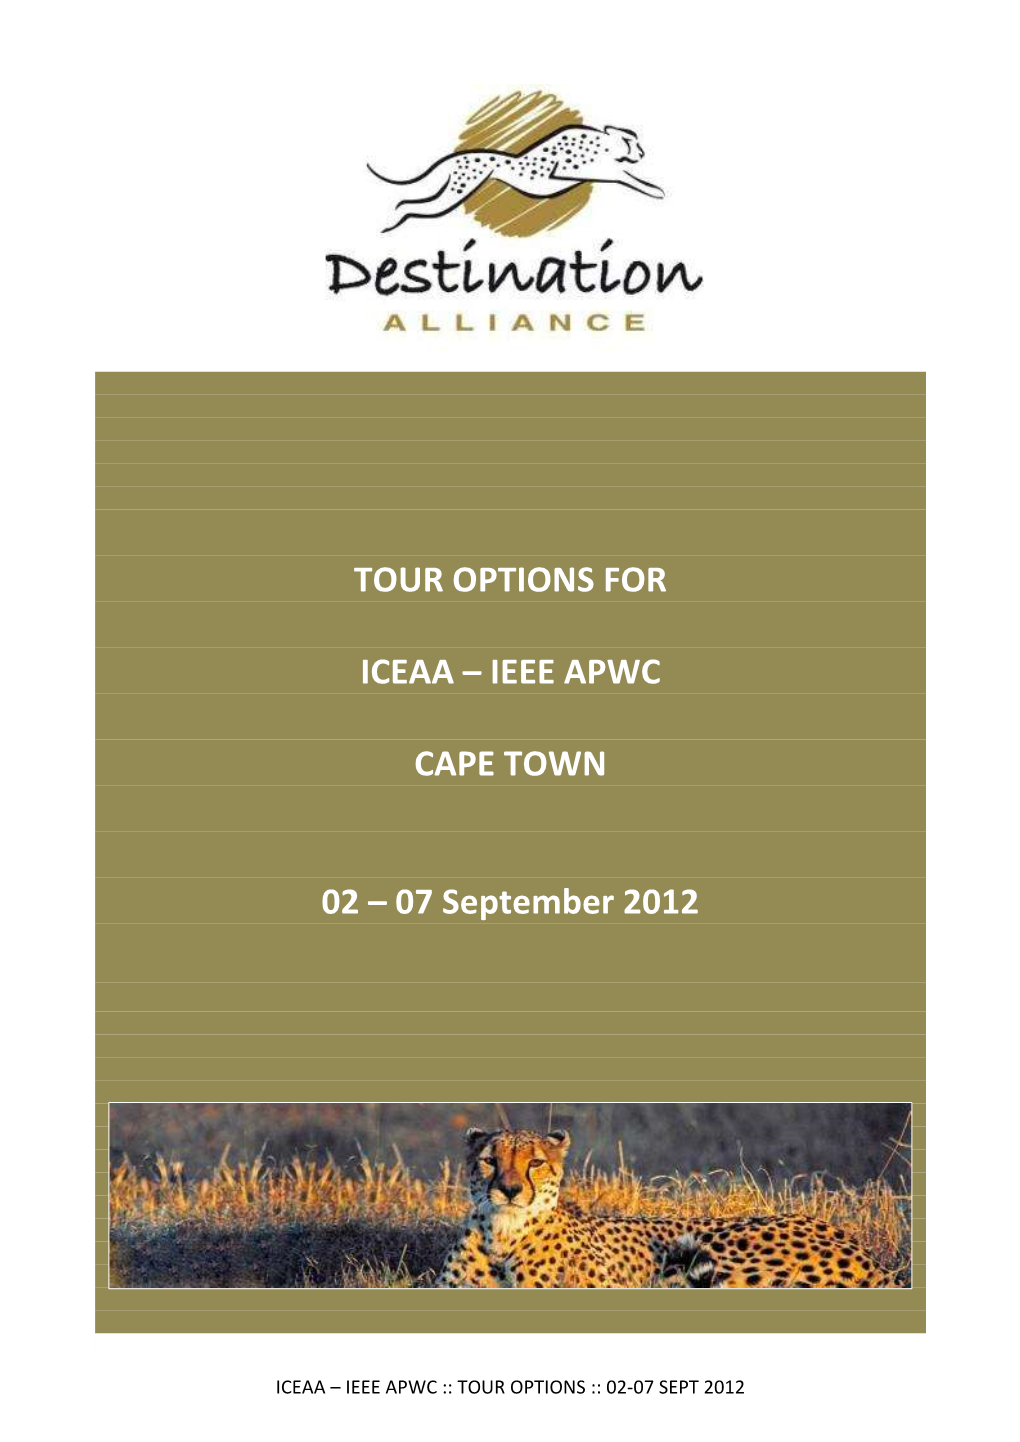 Tour Options for Iceaa – Ieee Apwc Cape Town 02 – 07